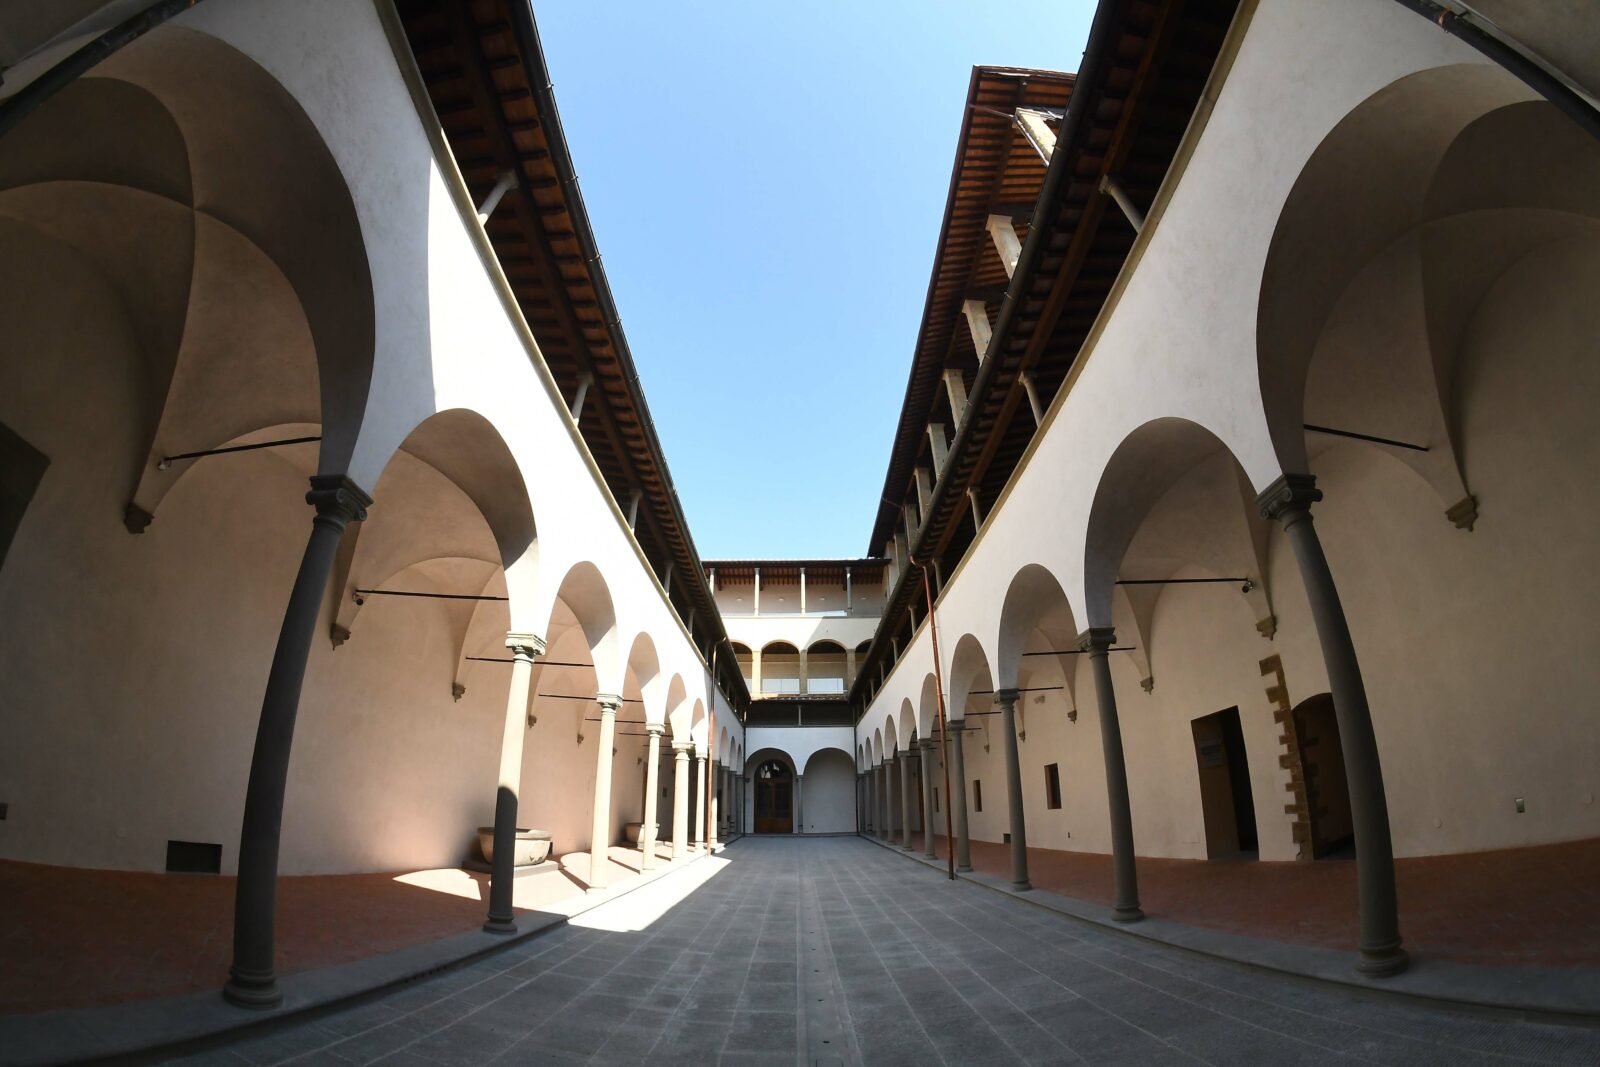 Courtyard of the Innocenti Museum